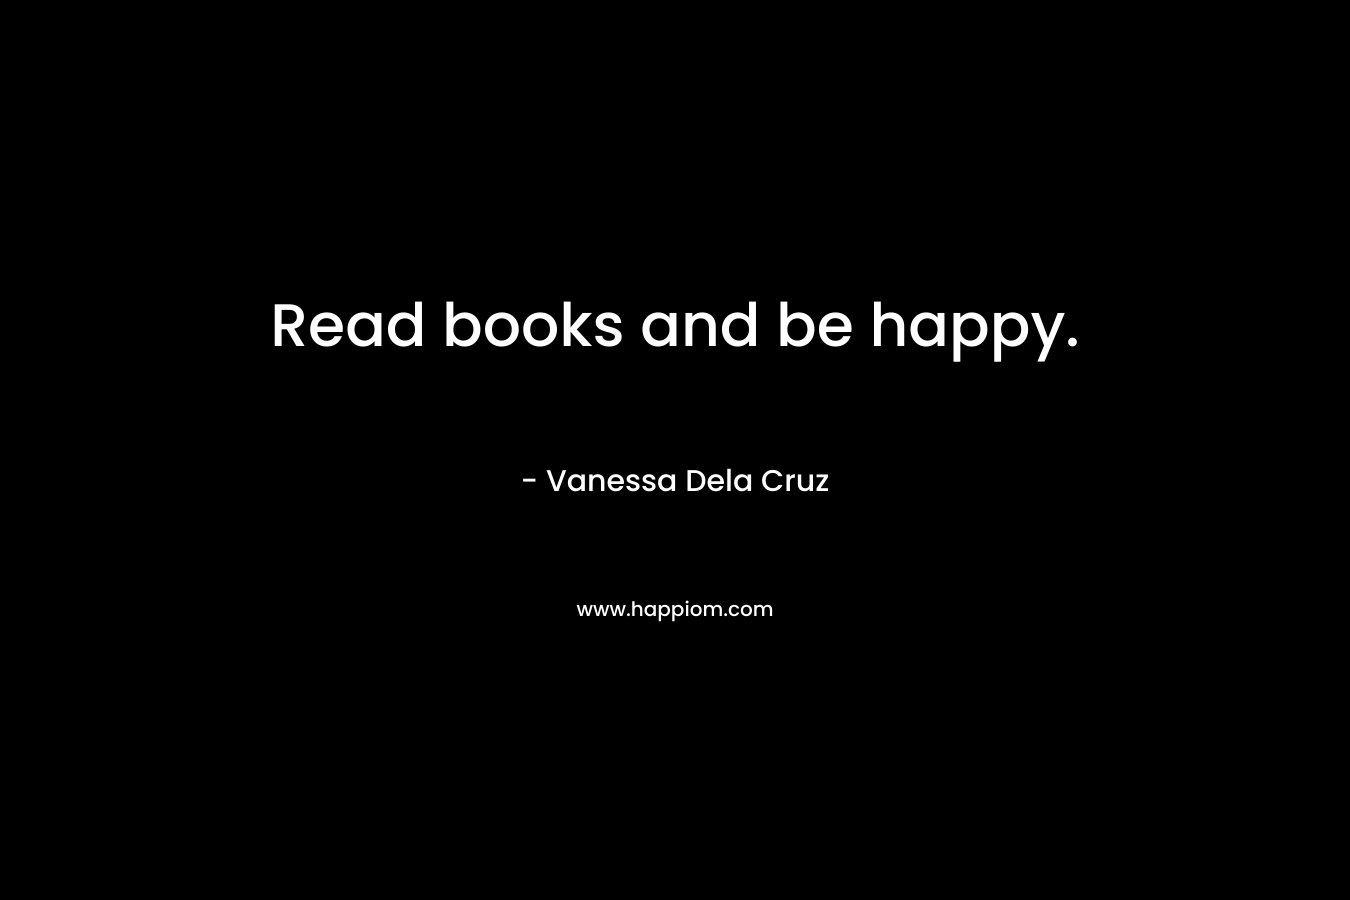 Read books and be happy.